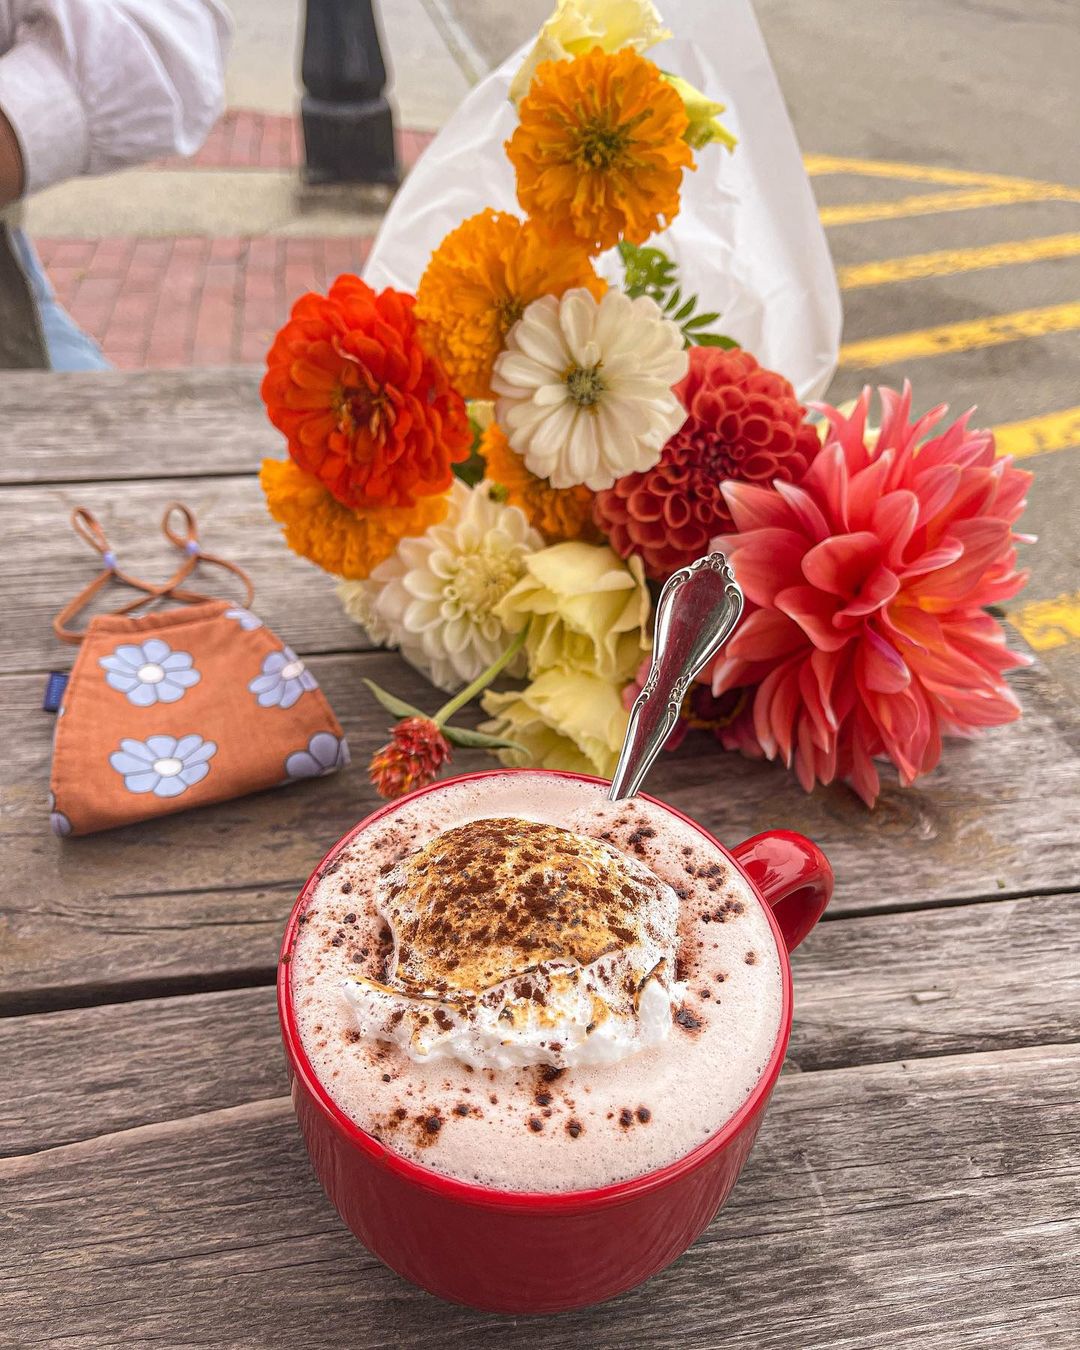 Coffee in a red cup, a bouquet of flowers, and an orange floral face mask on a wooden table